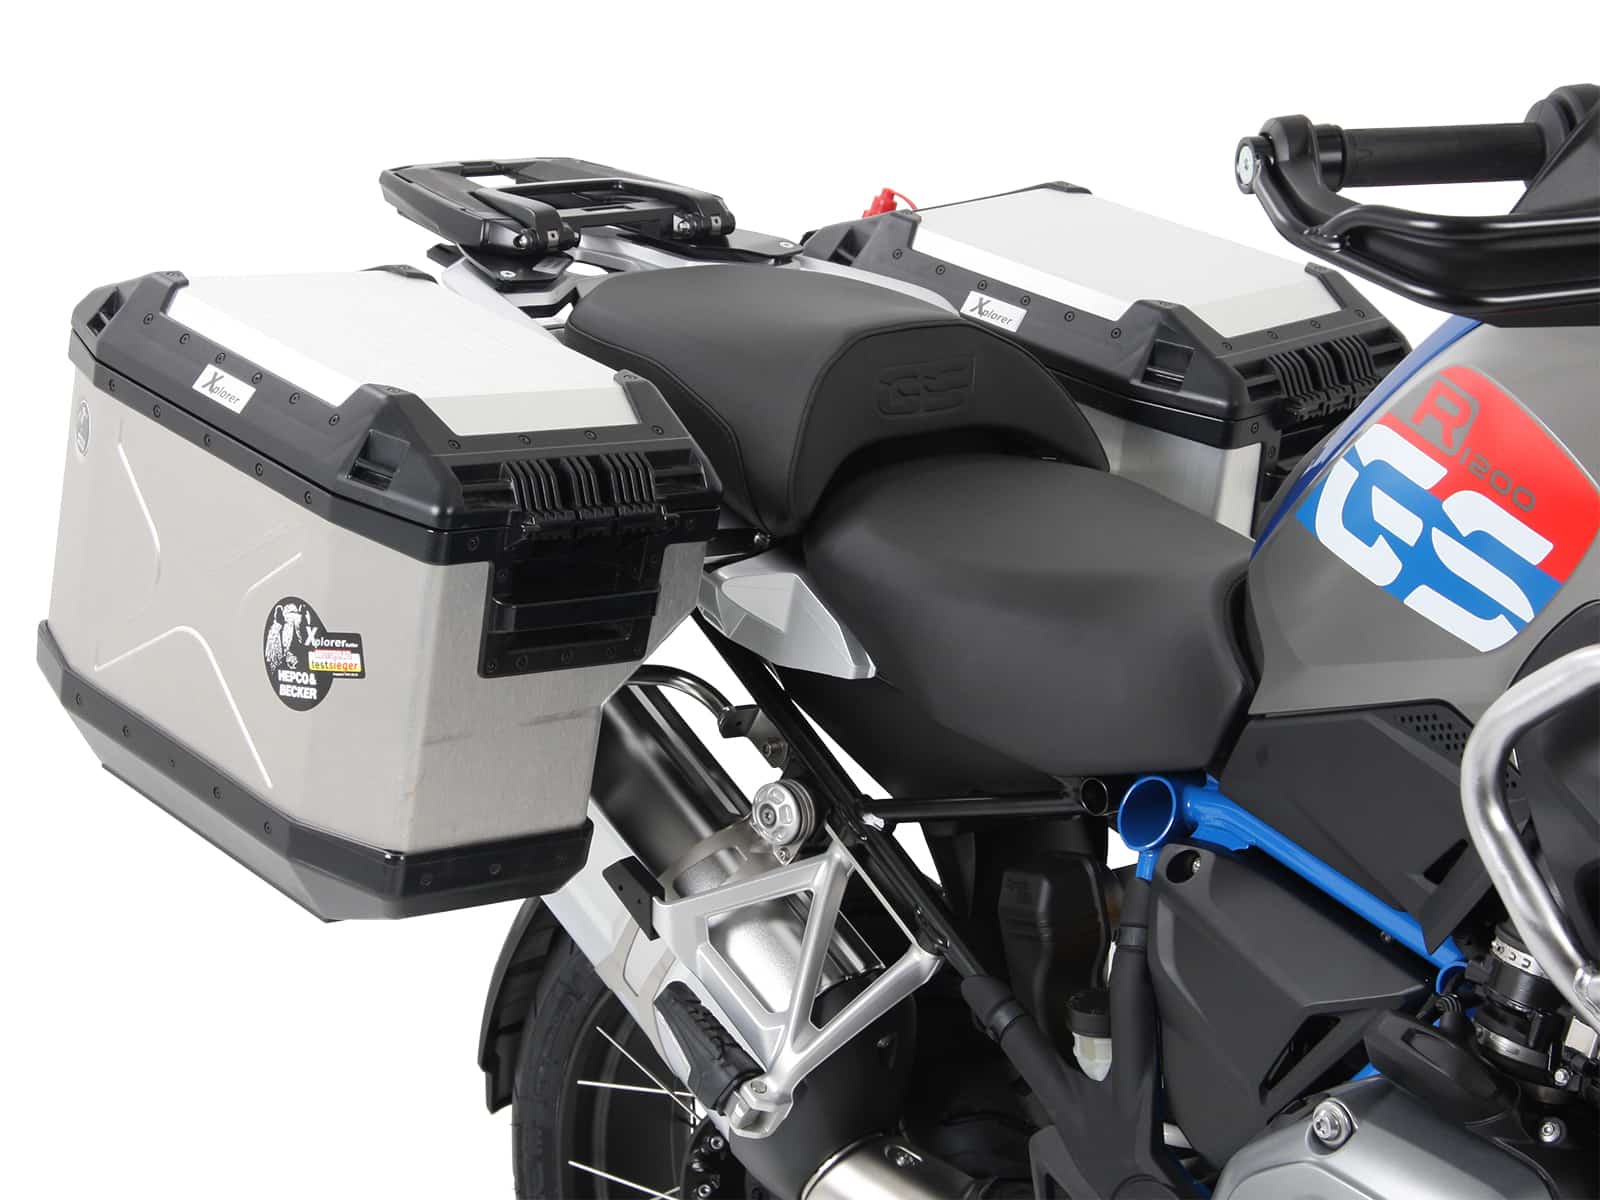 BMW R1200 GS 2004-2007 PPF Kit In Xpel